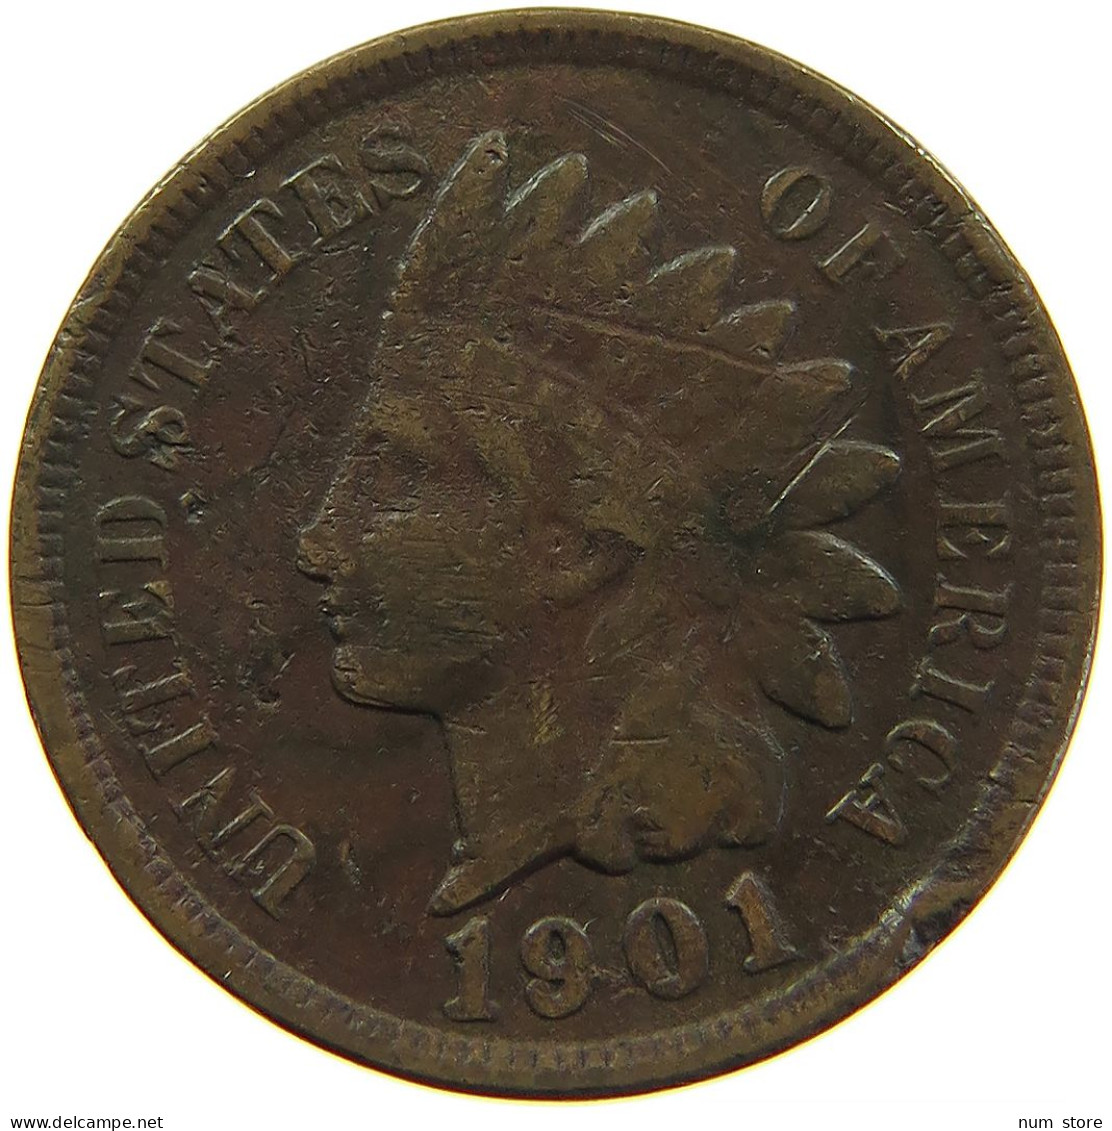 UNITED STATES OF AMERICA CENT 1901 INDIAN HEAD #s091 0365 - 1859-1909: Indian Head